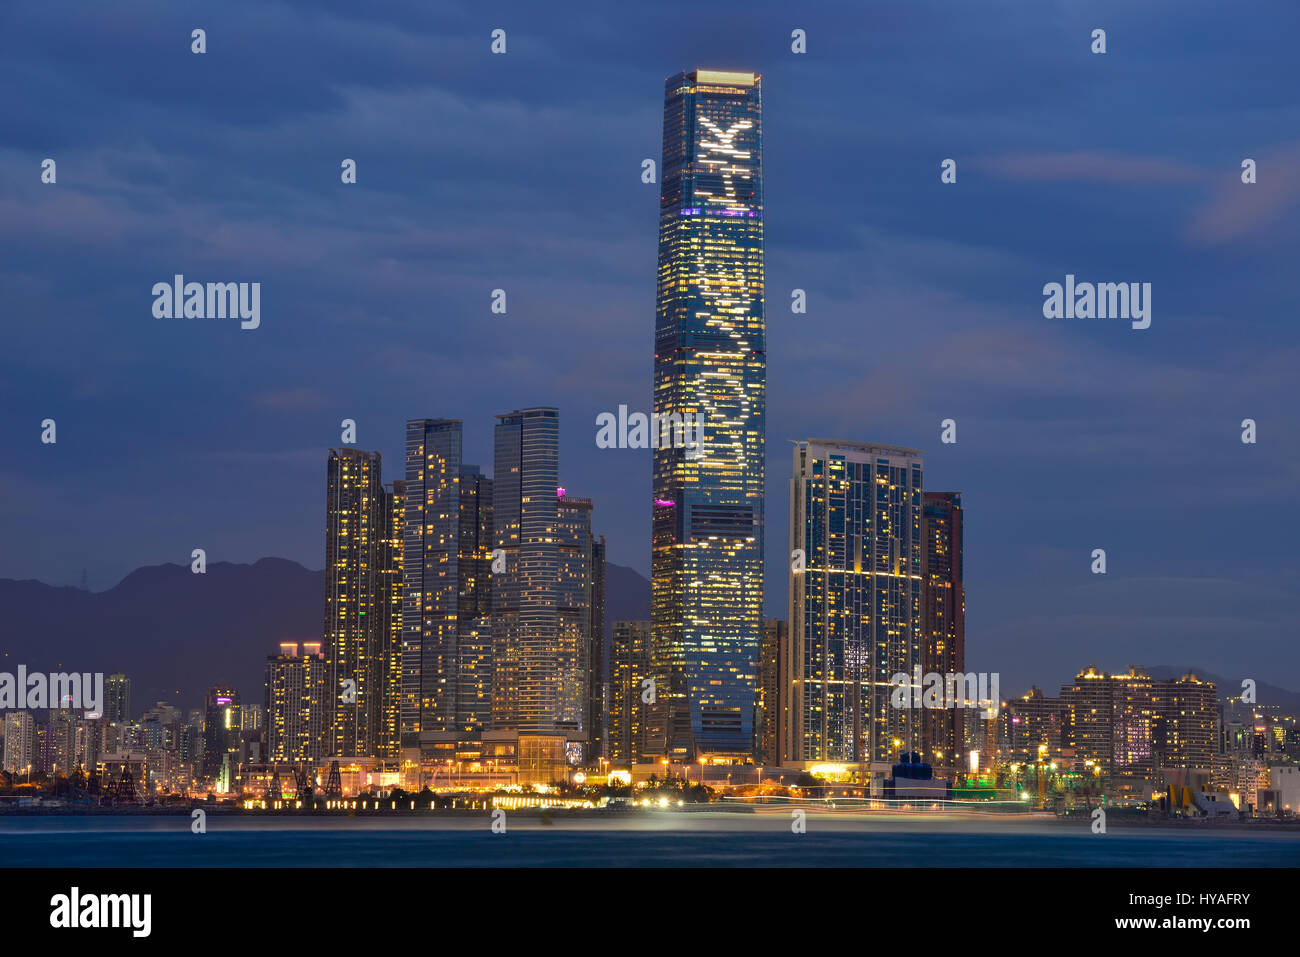 The new Kowloon skyline and Hong Kong's tallest building, The International Commerce Center ICC, Hong Kong, China. Stock Photo